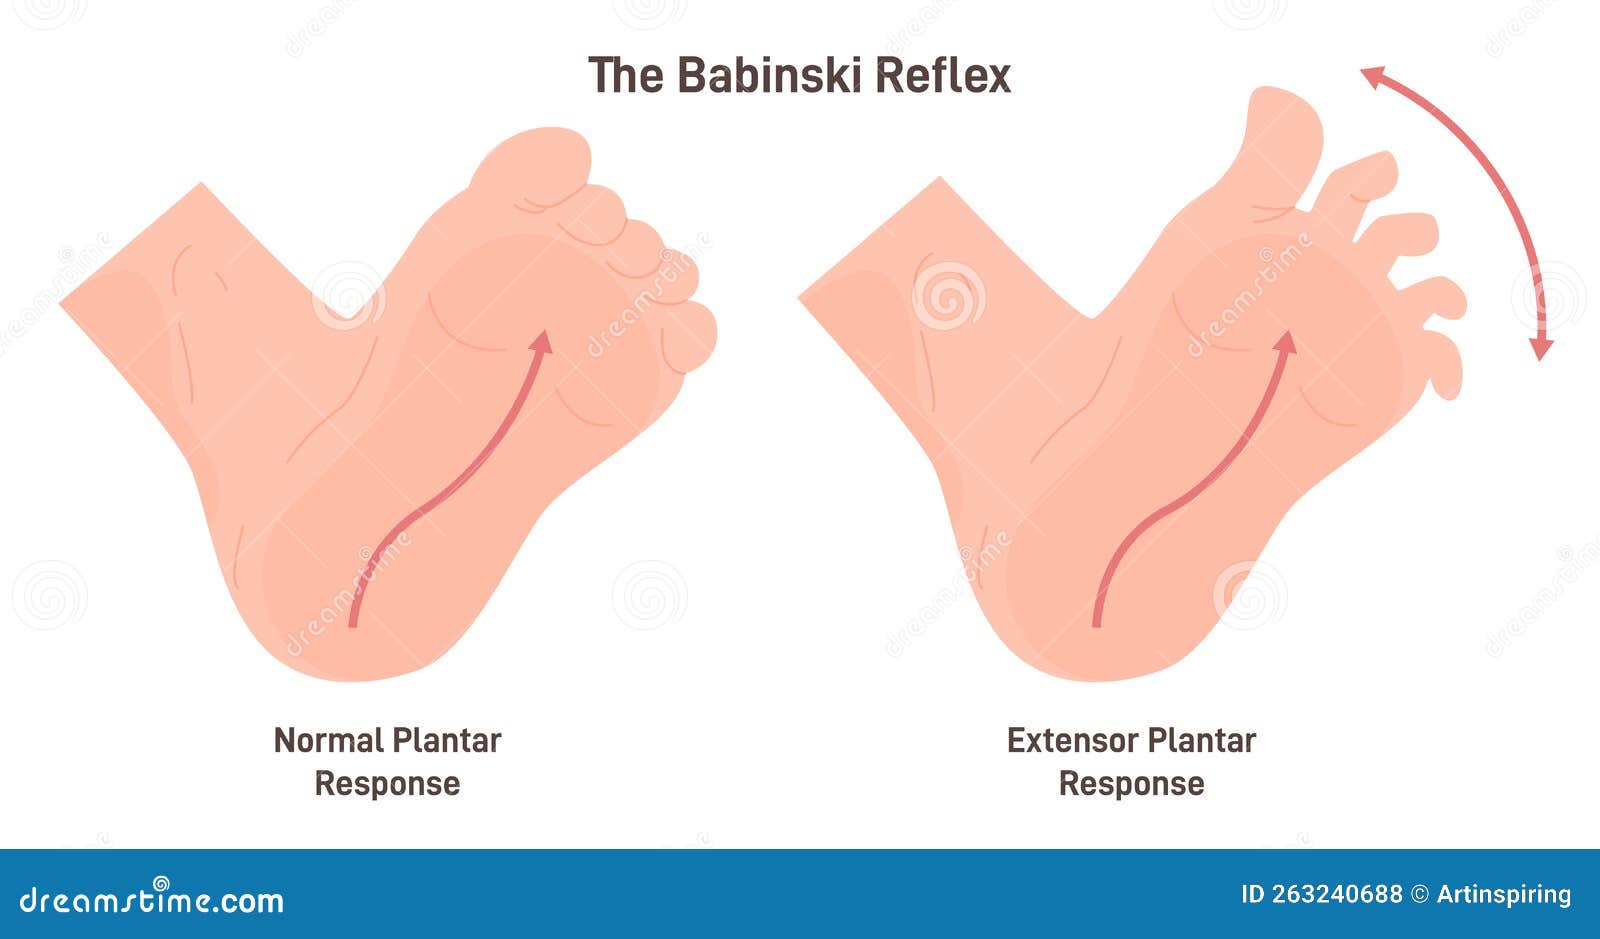 babinski reflex. stimulation of the lateral plantar aspect of the foot leads